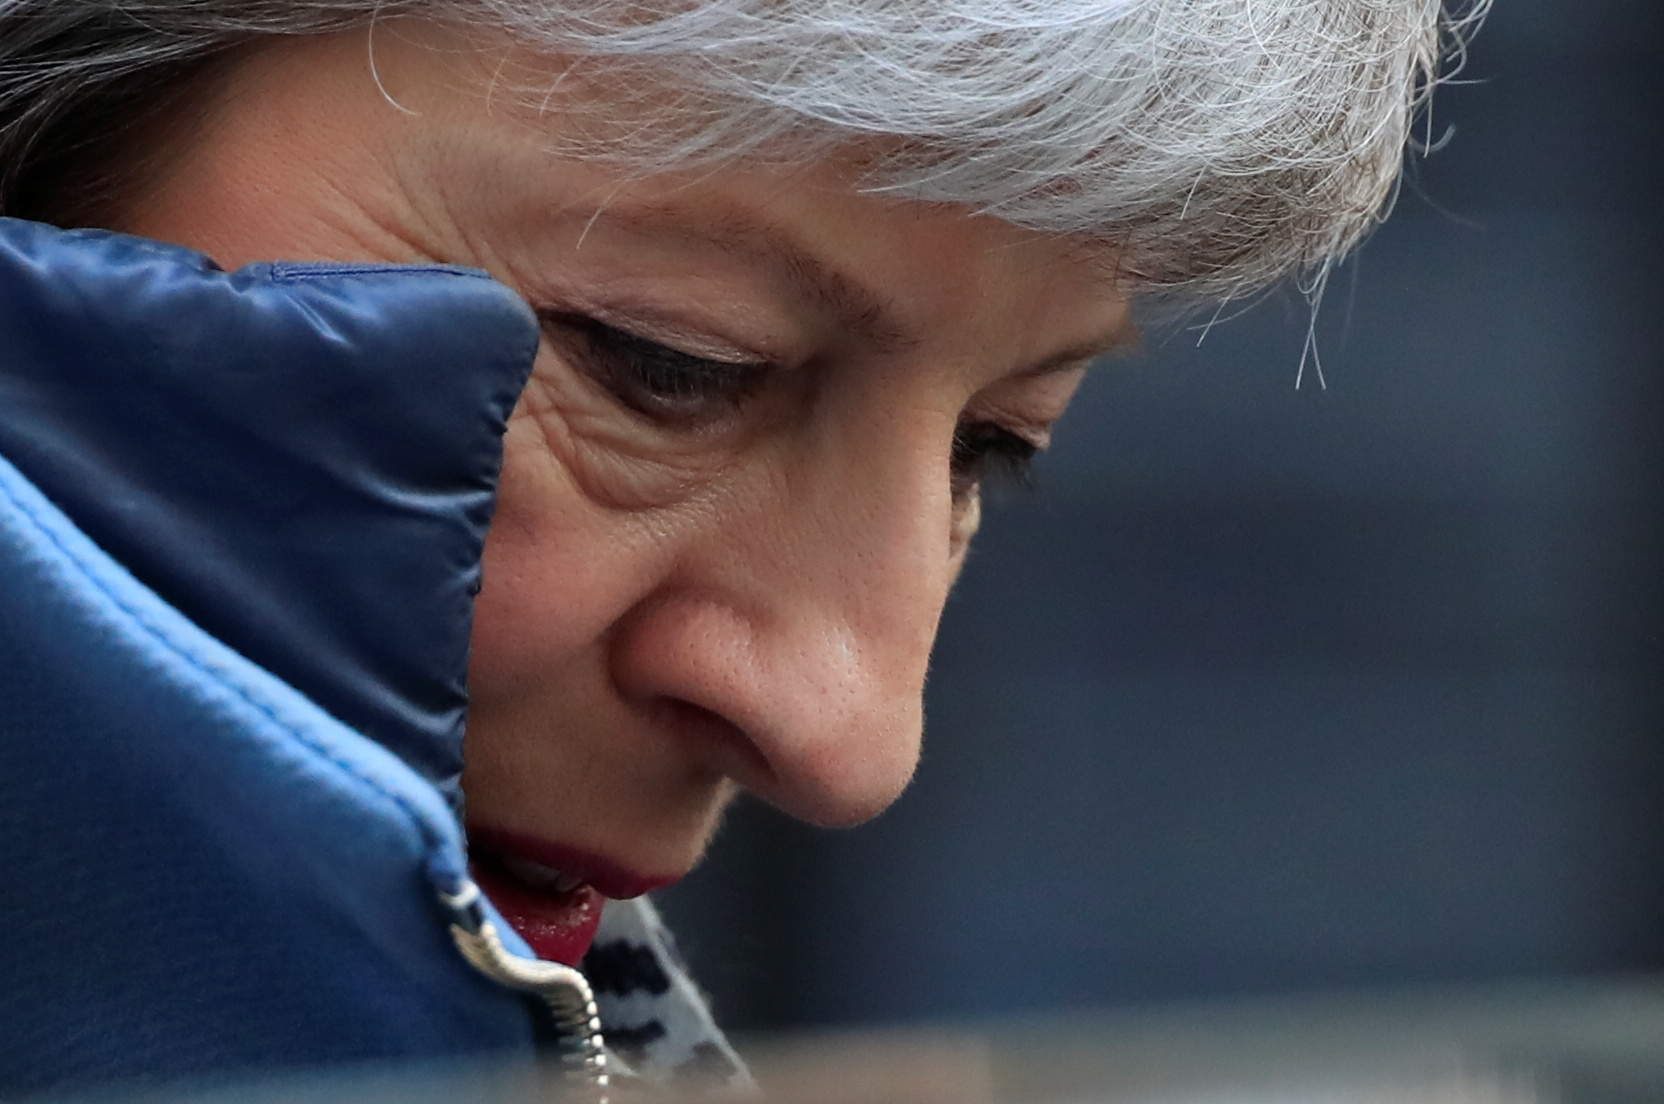 Britain's Prime Minister Theresa May leaves Downing Street in London